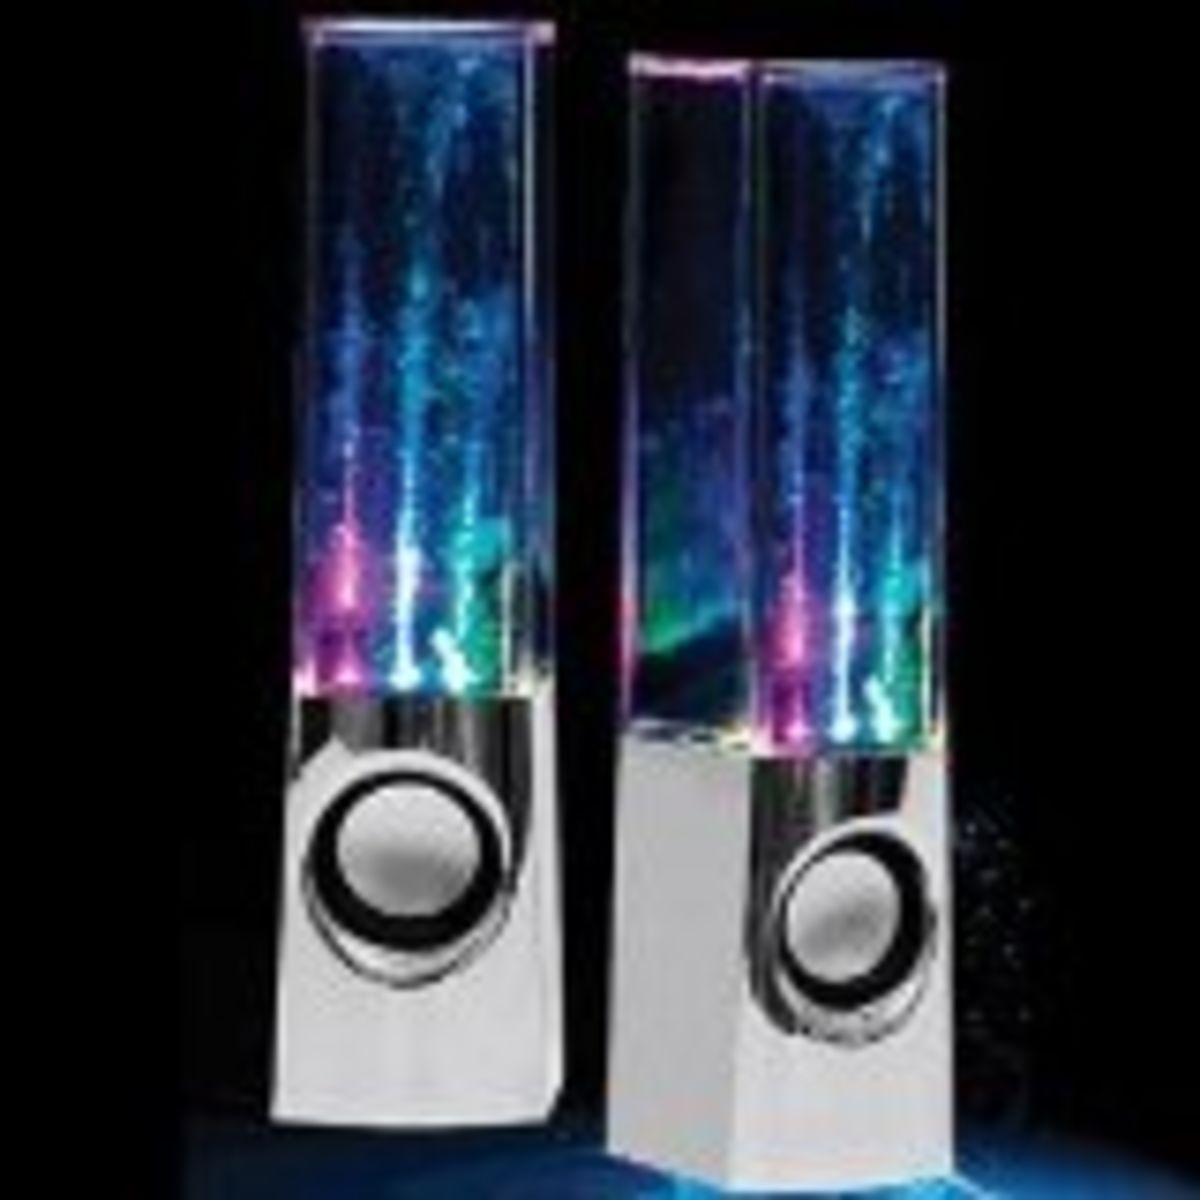 Best Light Up Water Speakers Reviews 2014 | A Listly List